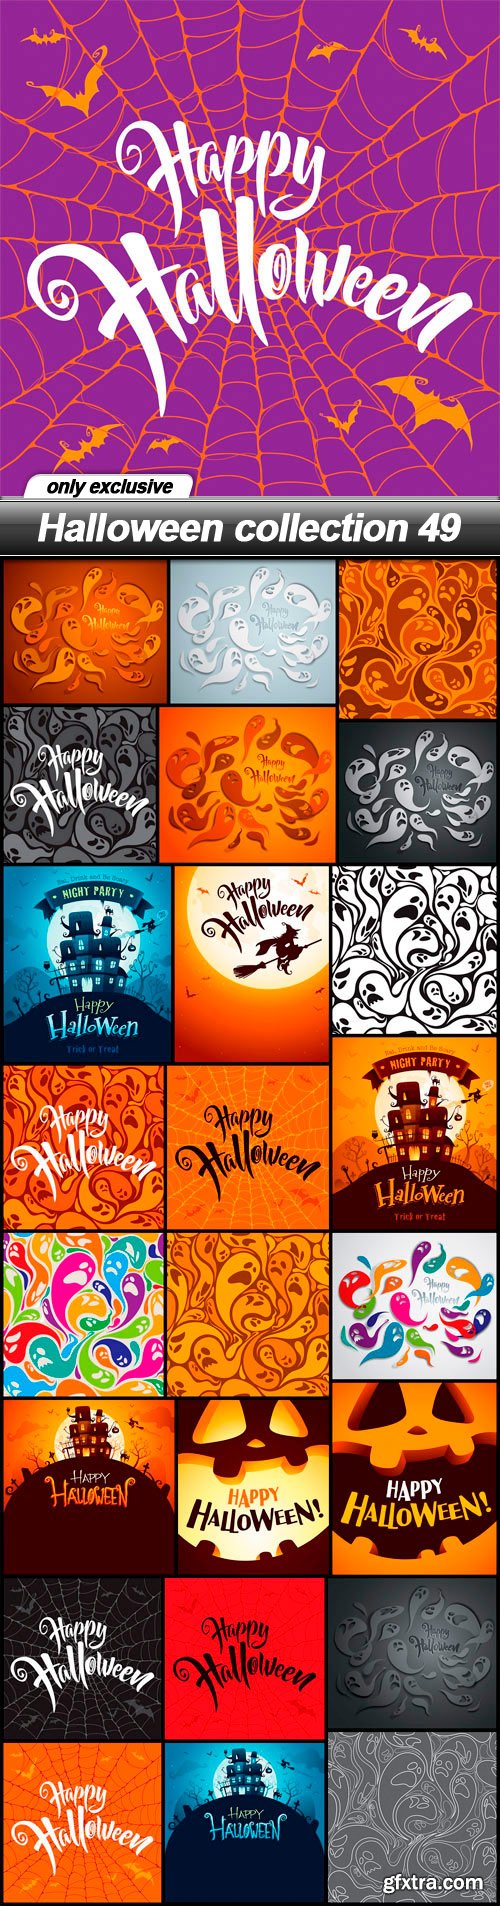 Halloween collection 49 - 25 EPS